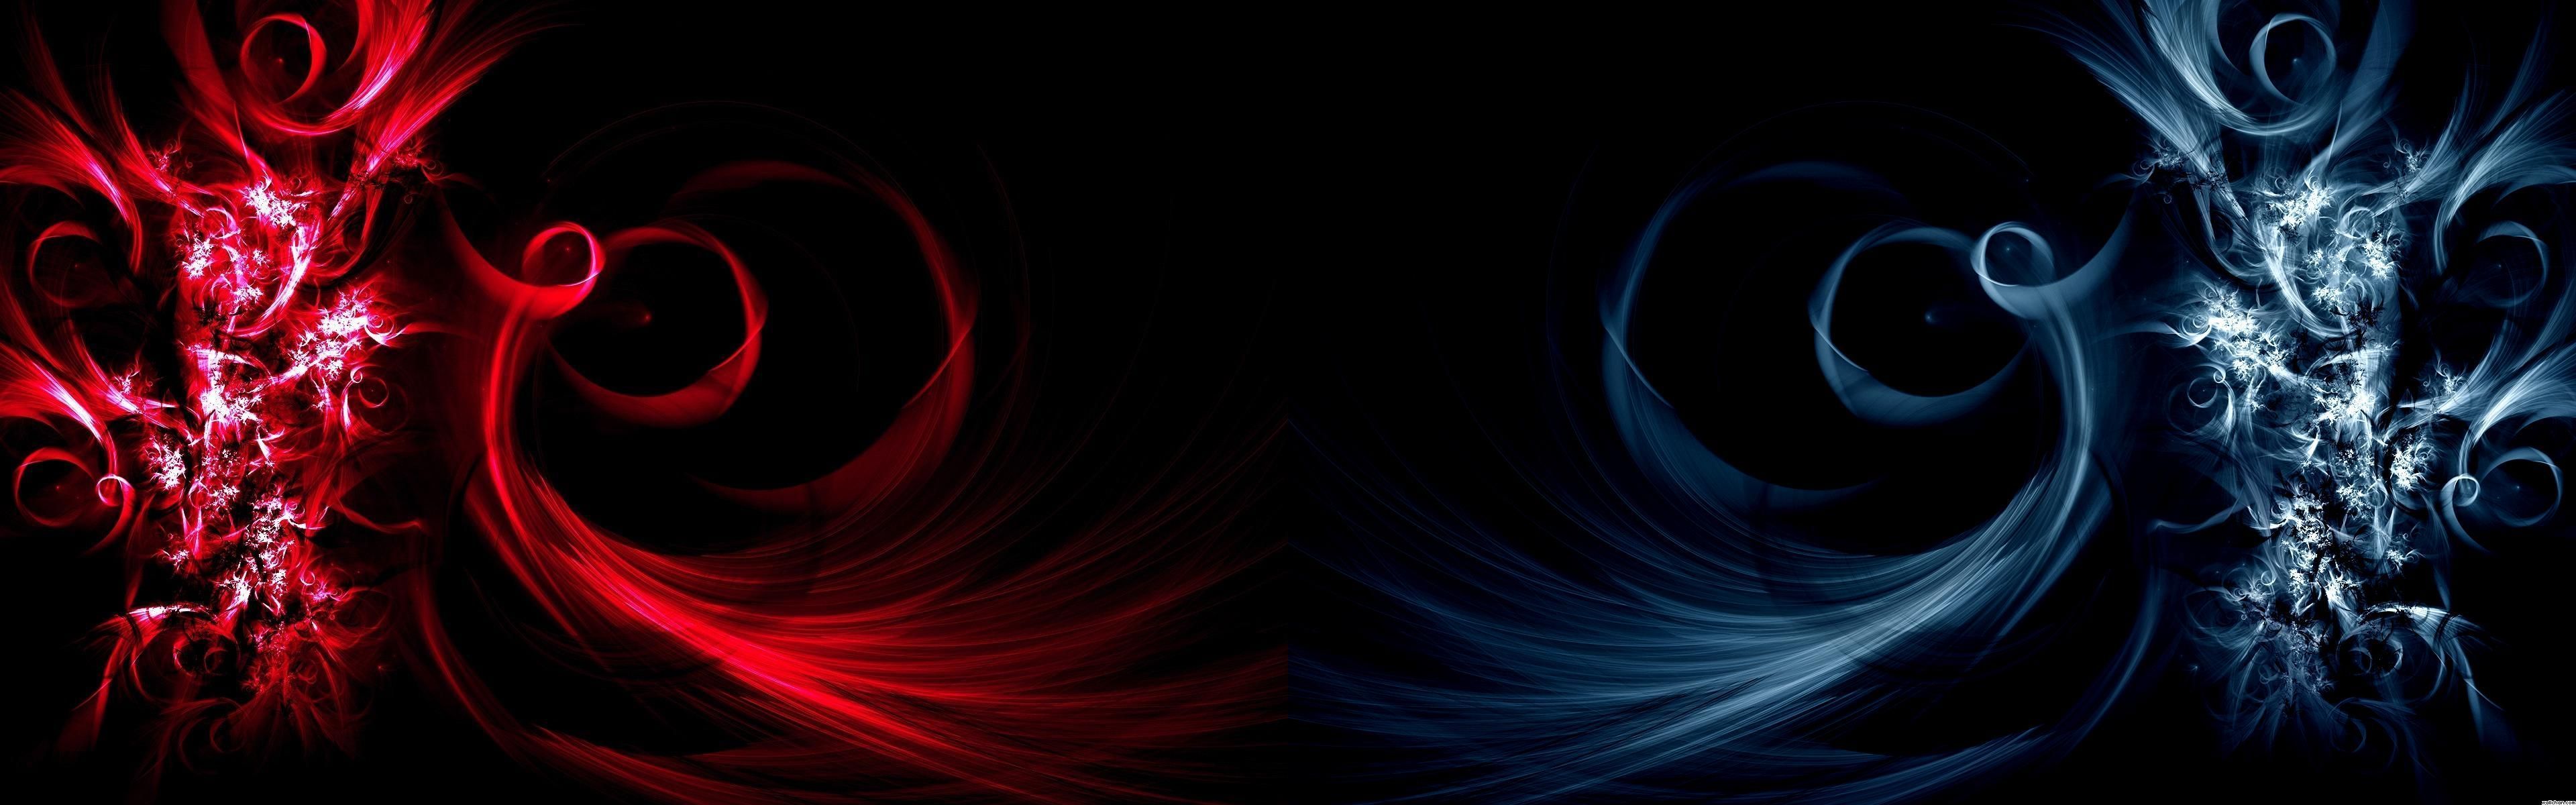 Abstract Dual Screen Wallpapers